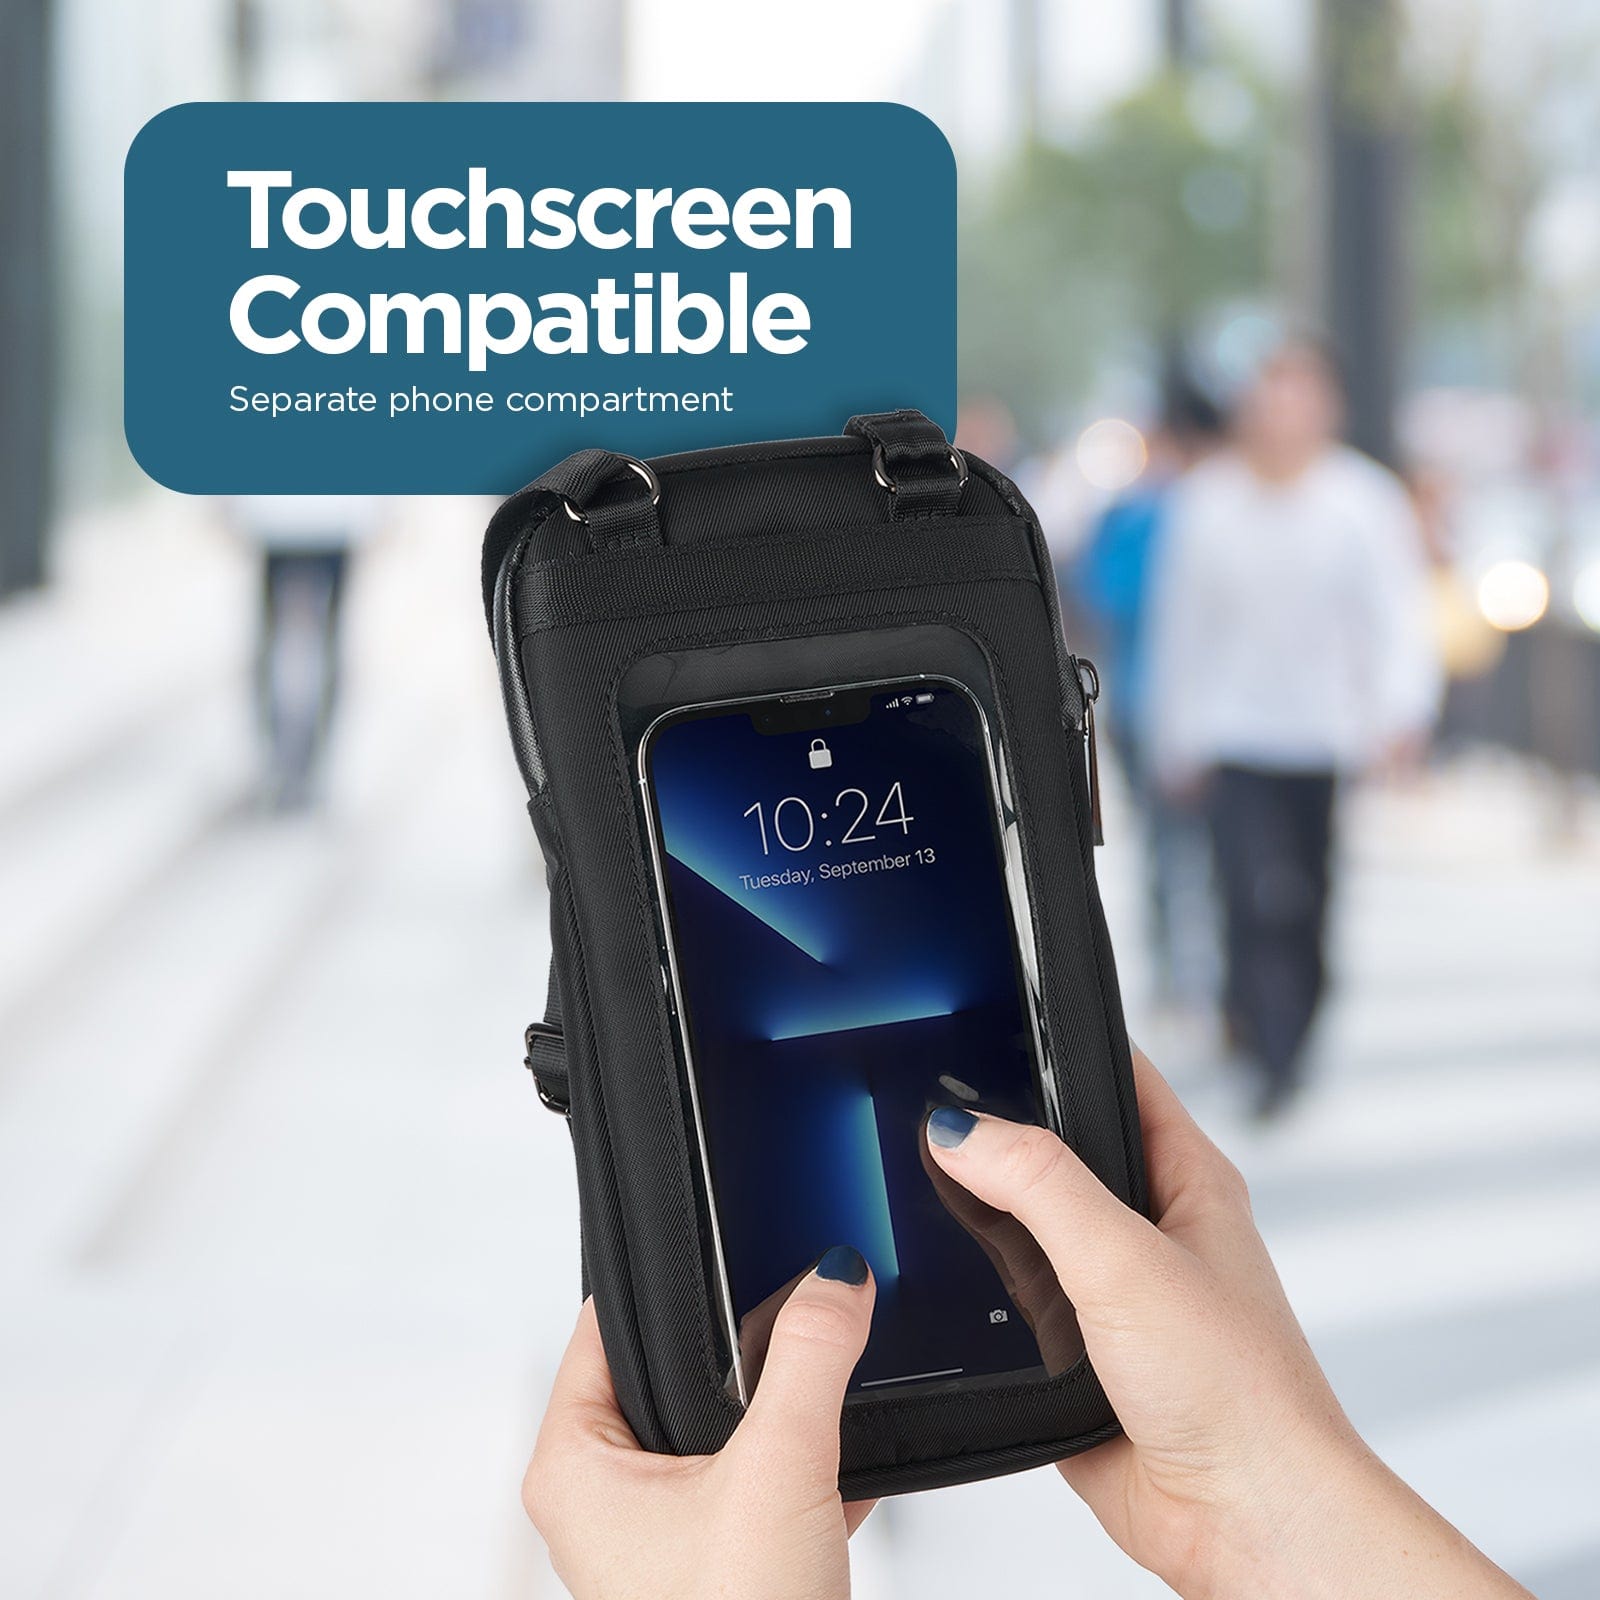 TOUCHSCREEN COMPATIBLE. SEPARATE PHONE COMPARTMENT